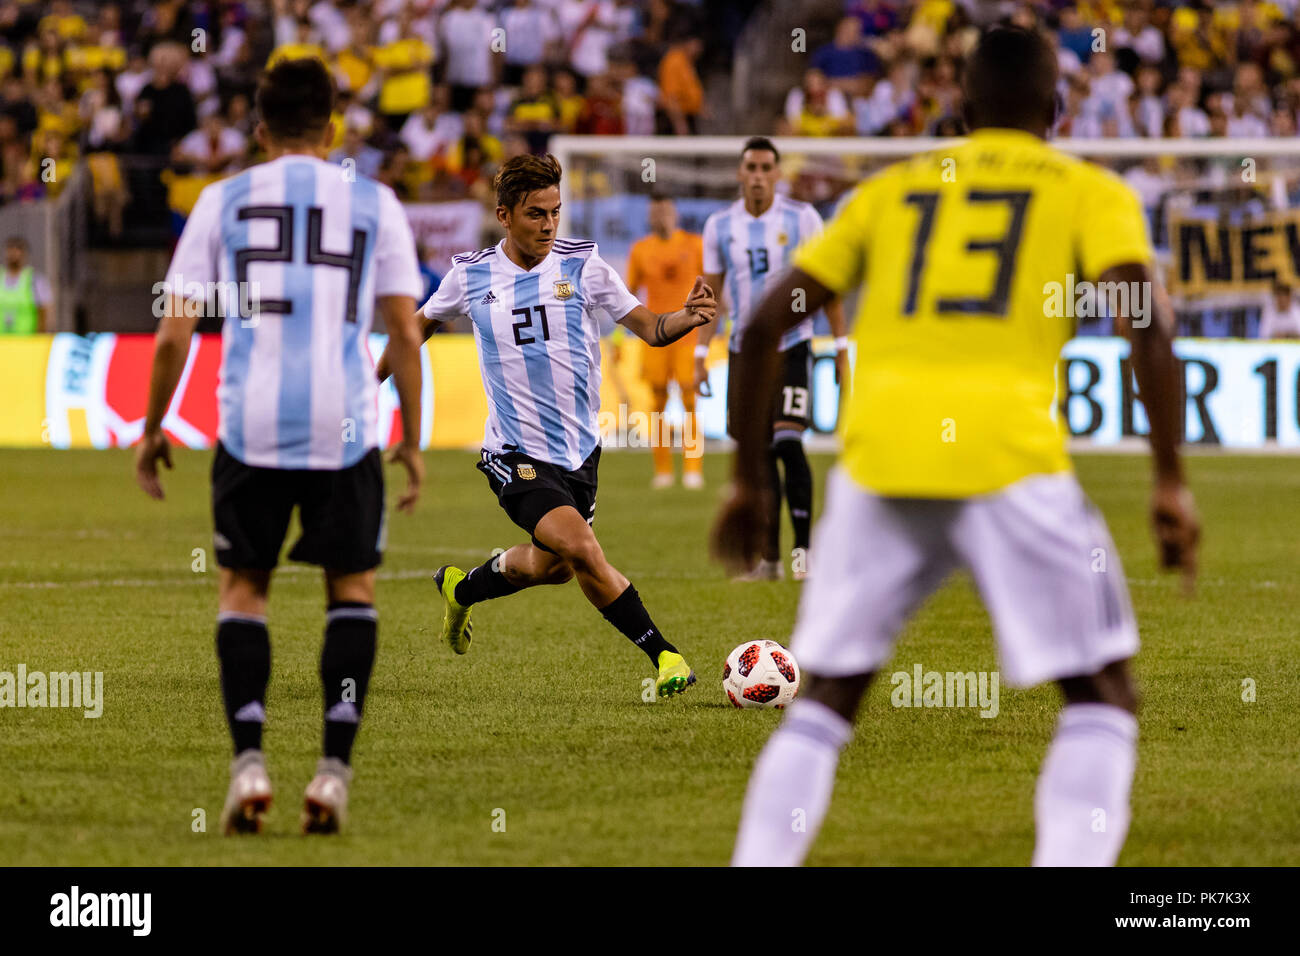 East Rutherford, NJ, USA. 11th Sept, 2018. Paulo Dybala (21) plays a long ball in the second half against Colombia at Metlife Stadium. © Ben Nichols/Alamy Live News. Stock Photo